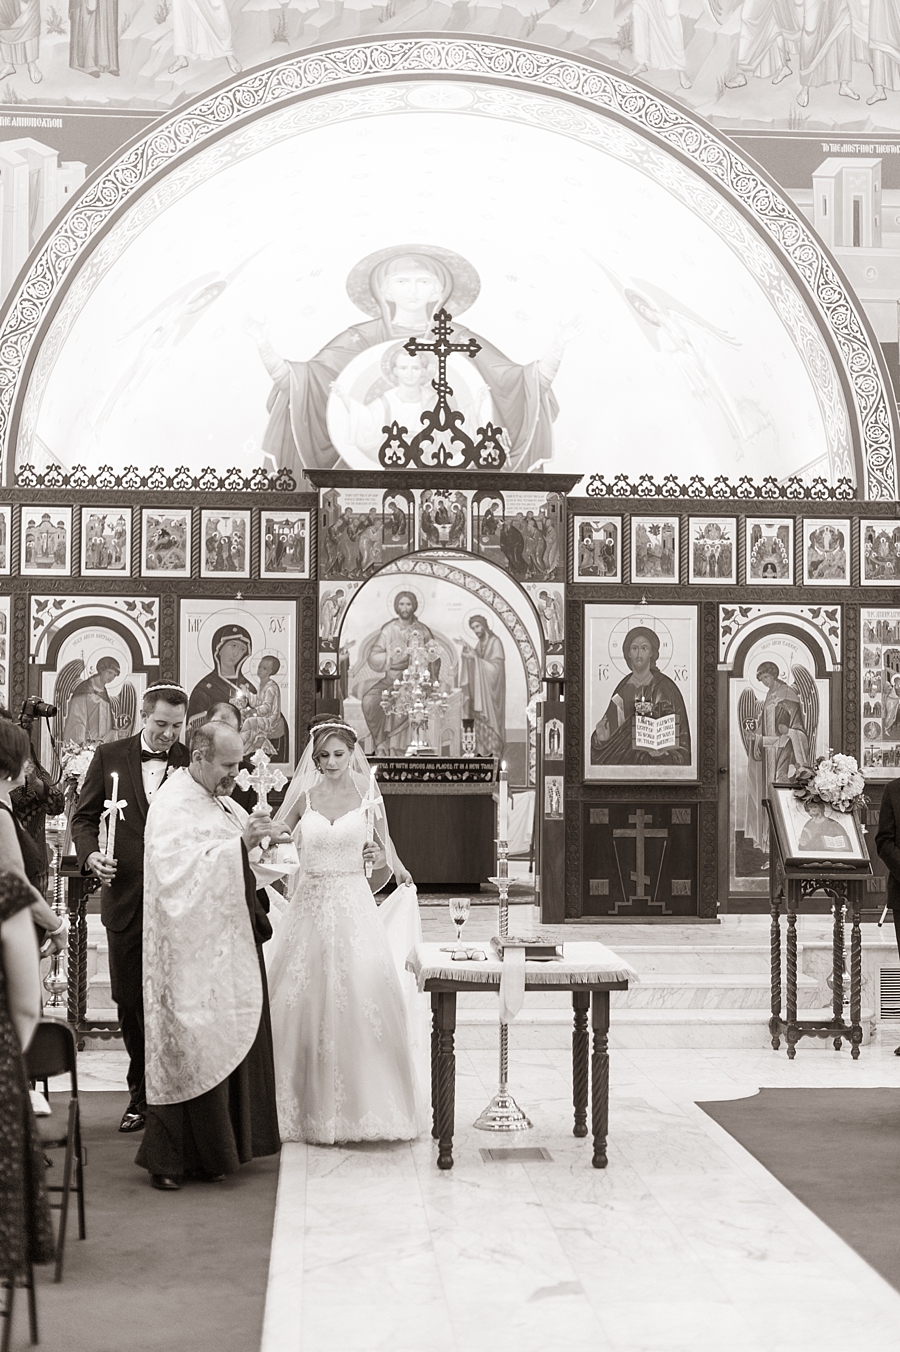 The Orthodox Christian Church of the Annunciation